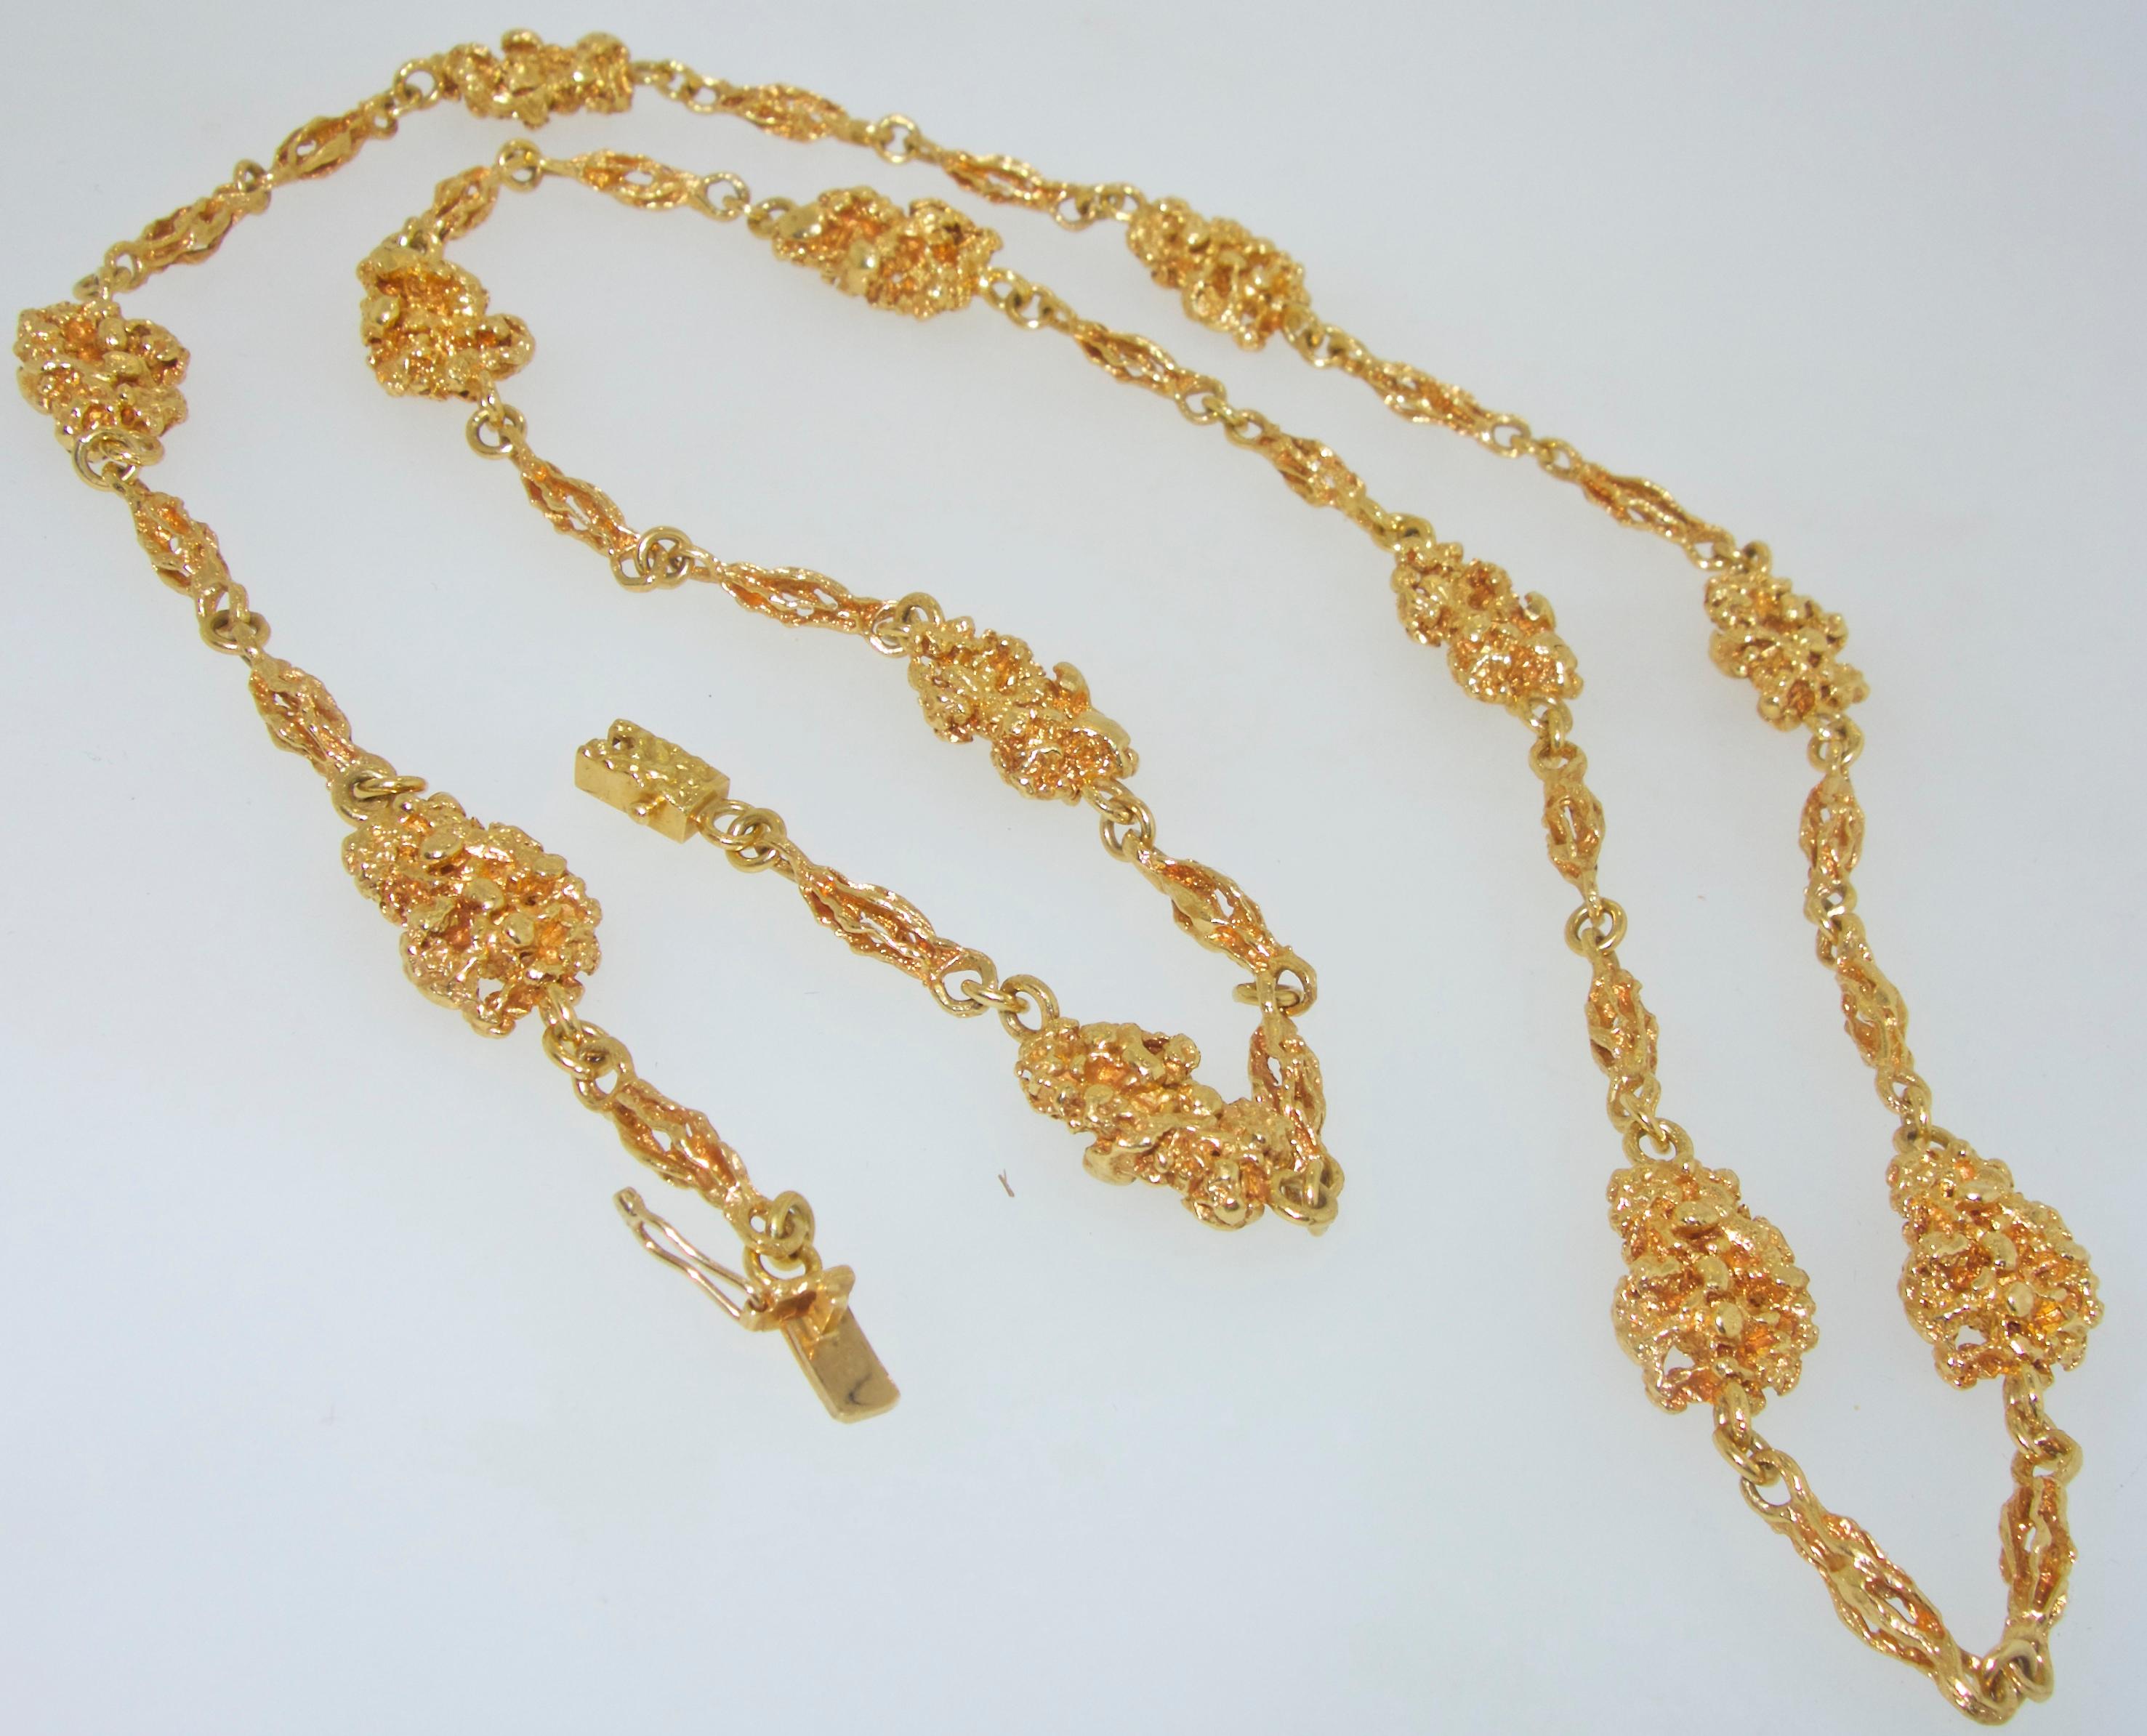 Van Cleef & Arpels gold nugget long necklace.  Signed and numbered, this 30 inch Van Cleef & Arpels necklace chain was probably made about the same time as their classic and iconic hand-hammered cuff bracelets when the world famous jewelry house was